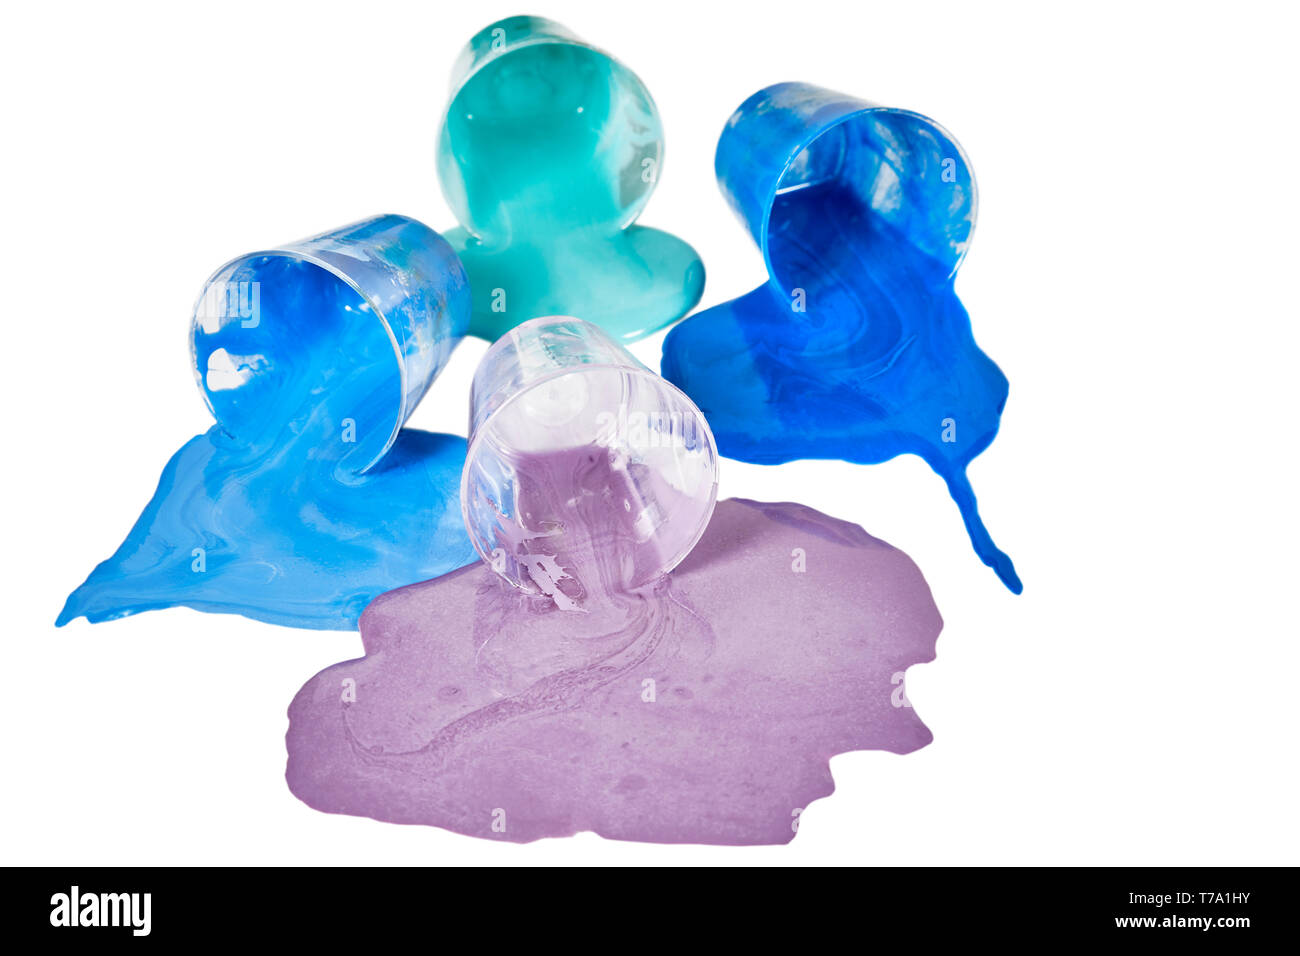 Small bowls of spilled lavender, blue and teal acrylic paint laying on its side isolated on white Stock Photo